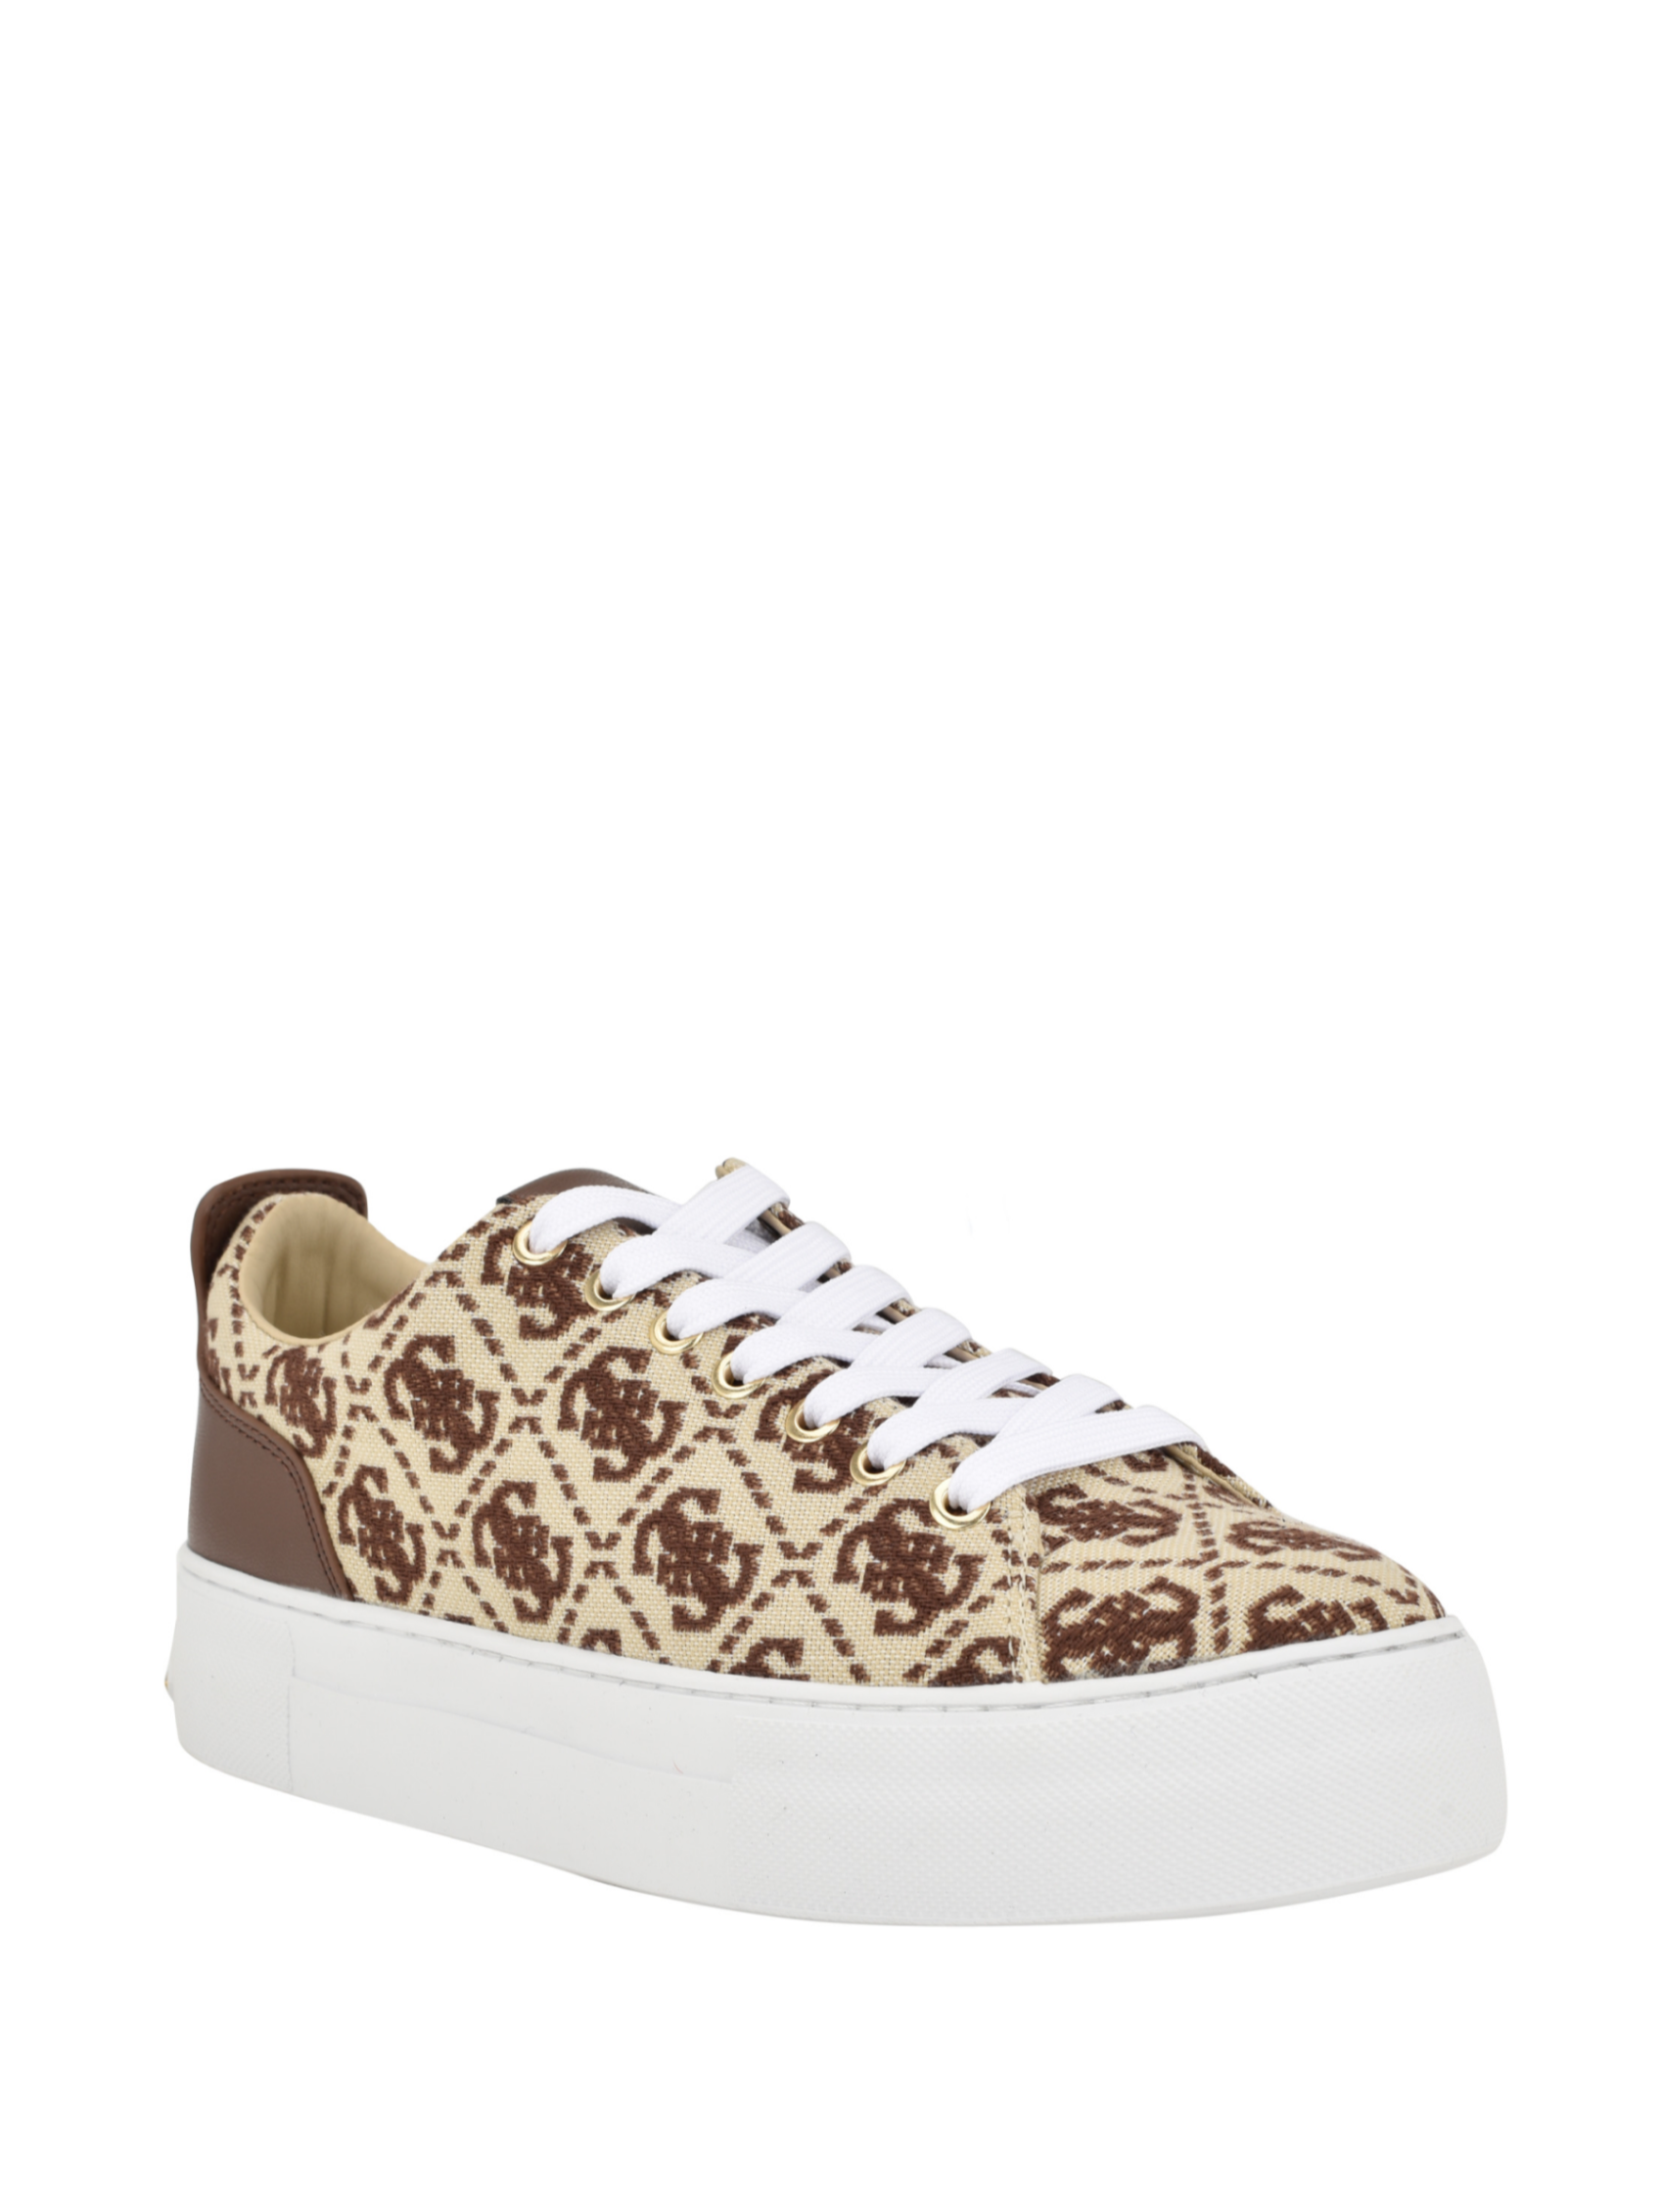 Gianelle 4g Sneakers - Guess